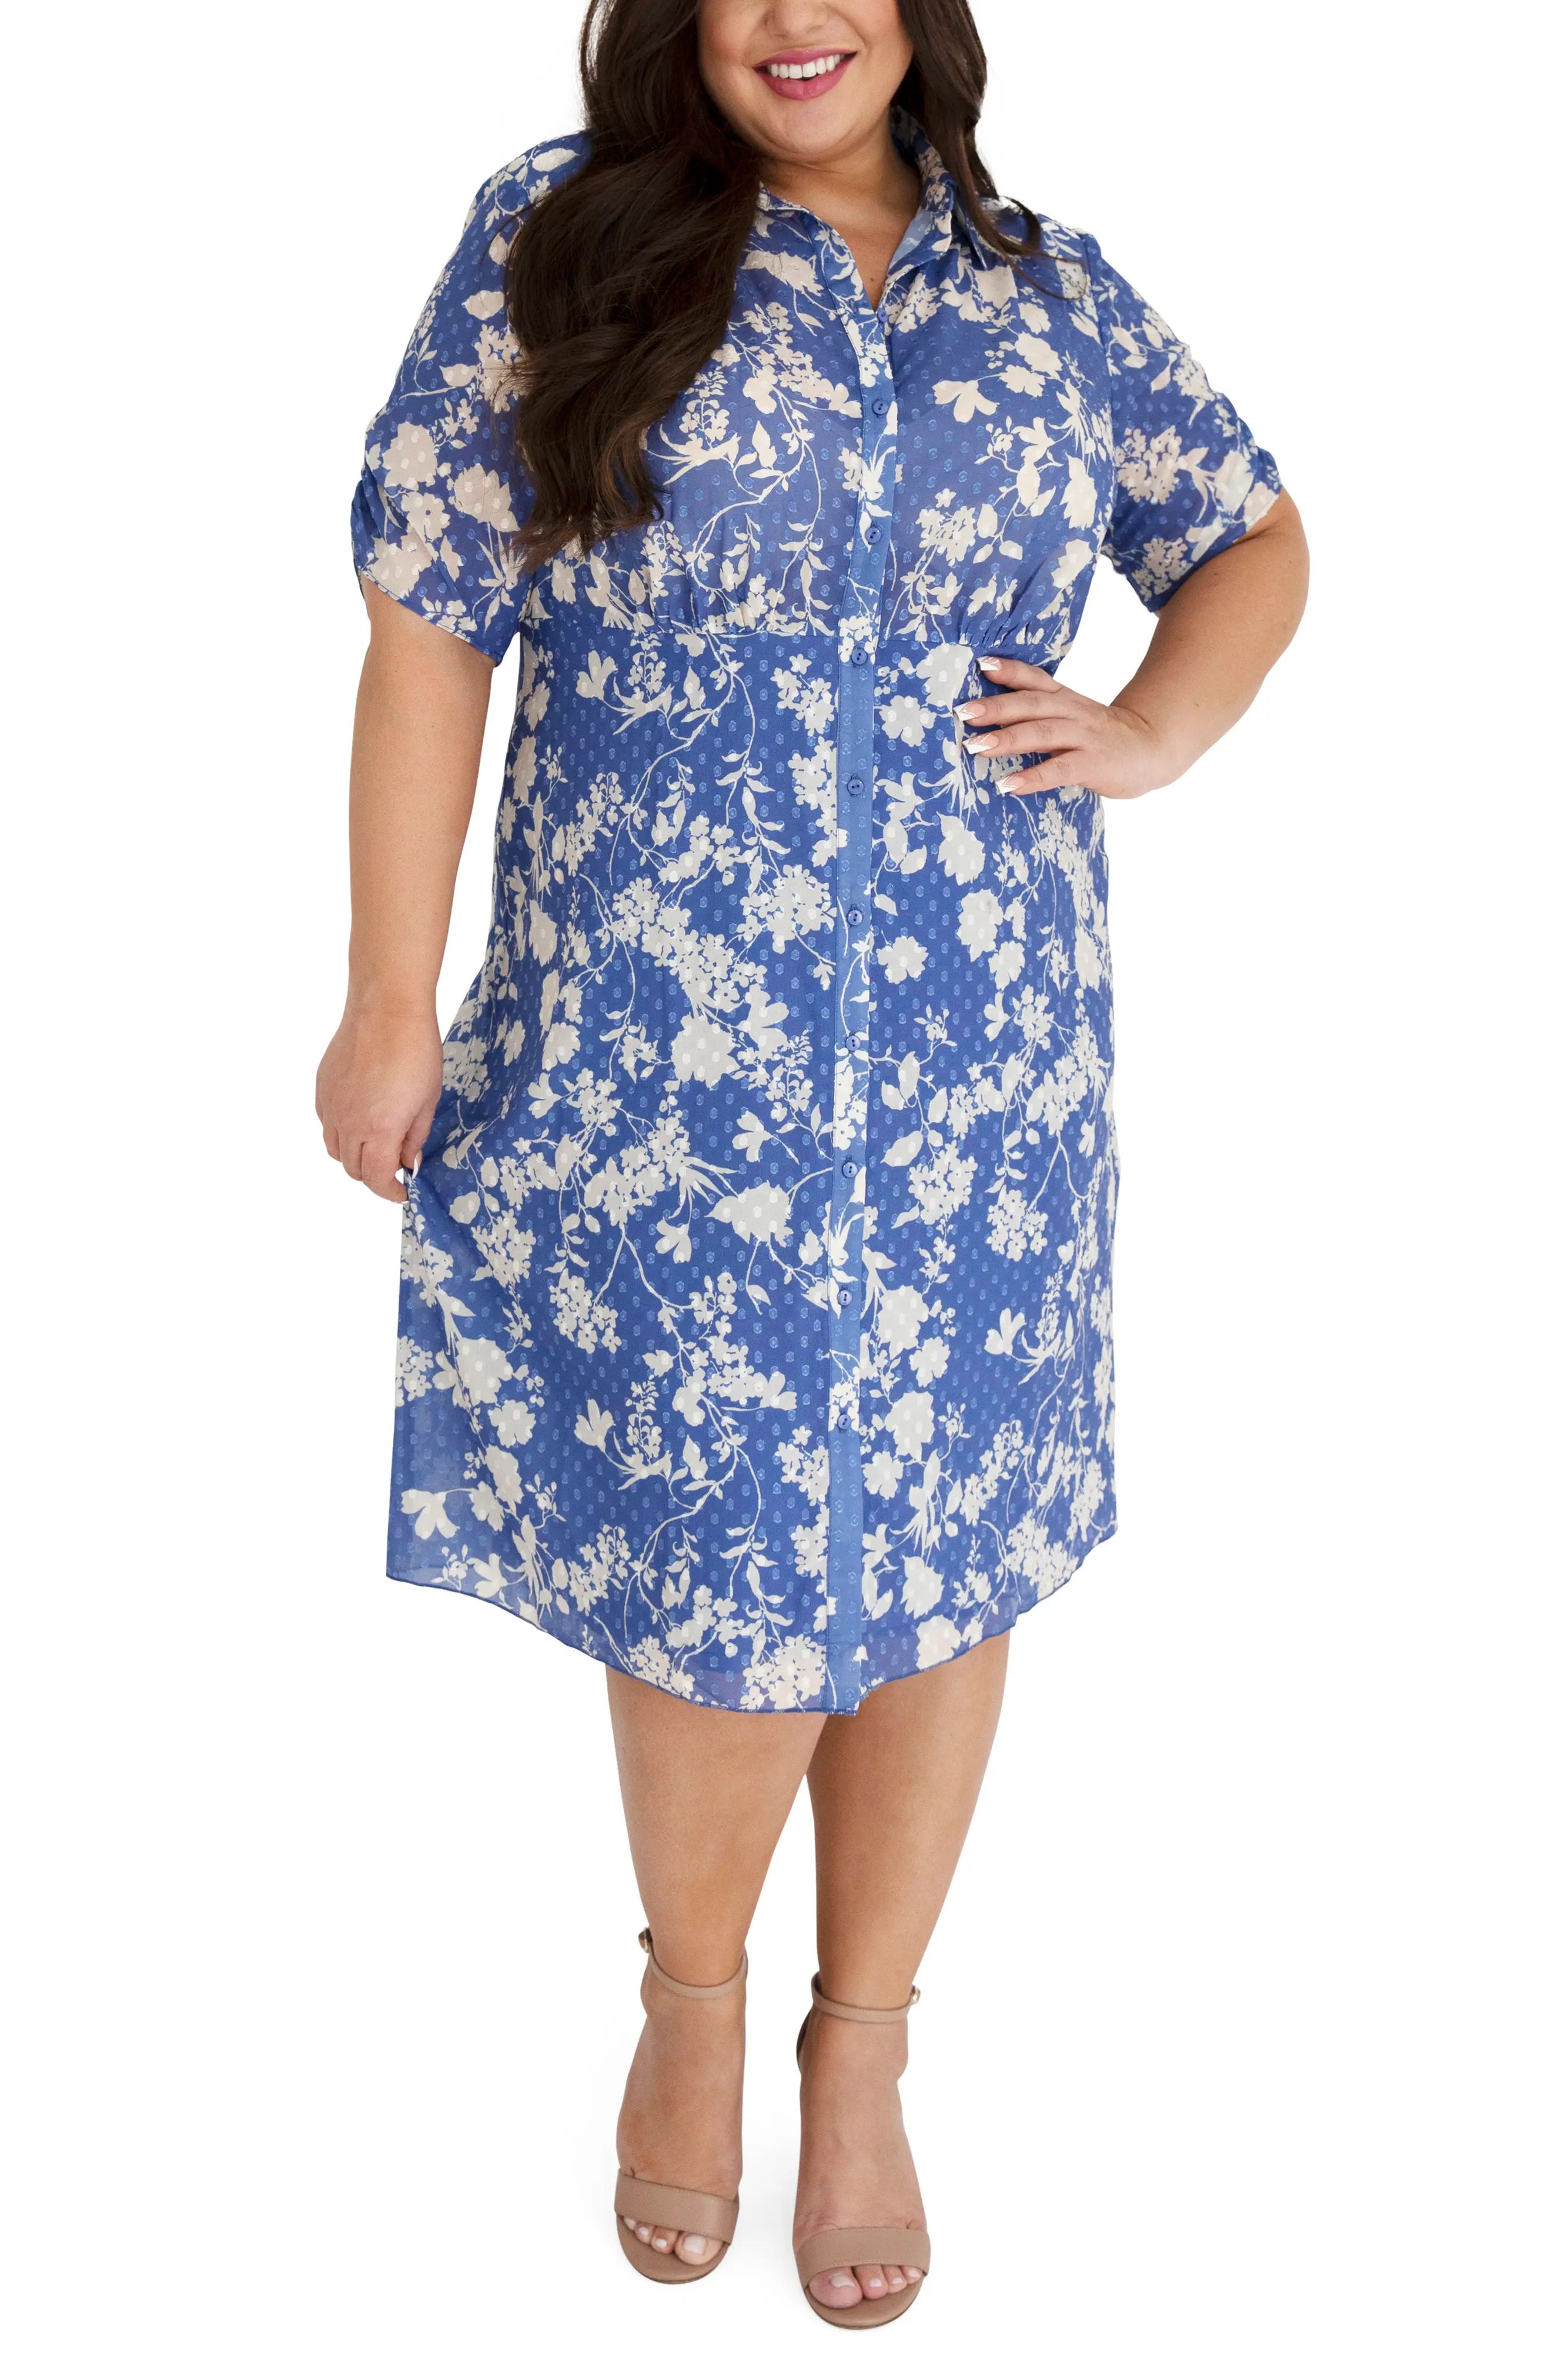 Maree Pour Toi Floral Jacquard Midi Shirtdress in Blue at Nordstrom, Size 18W | Nordstrom